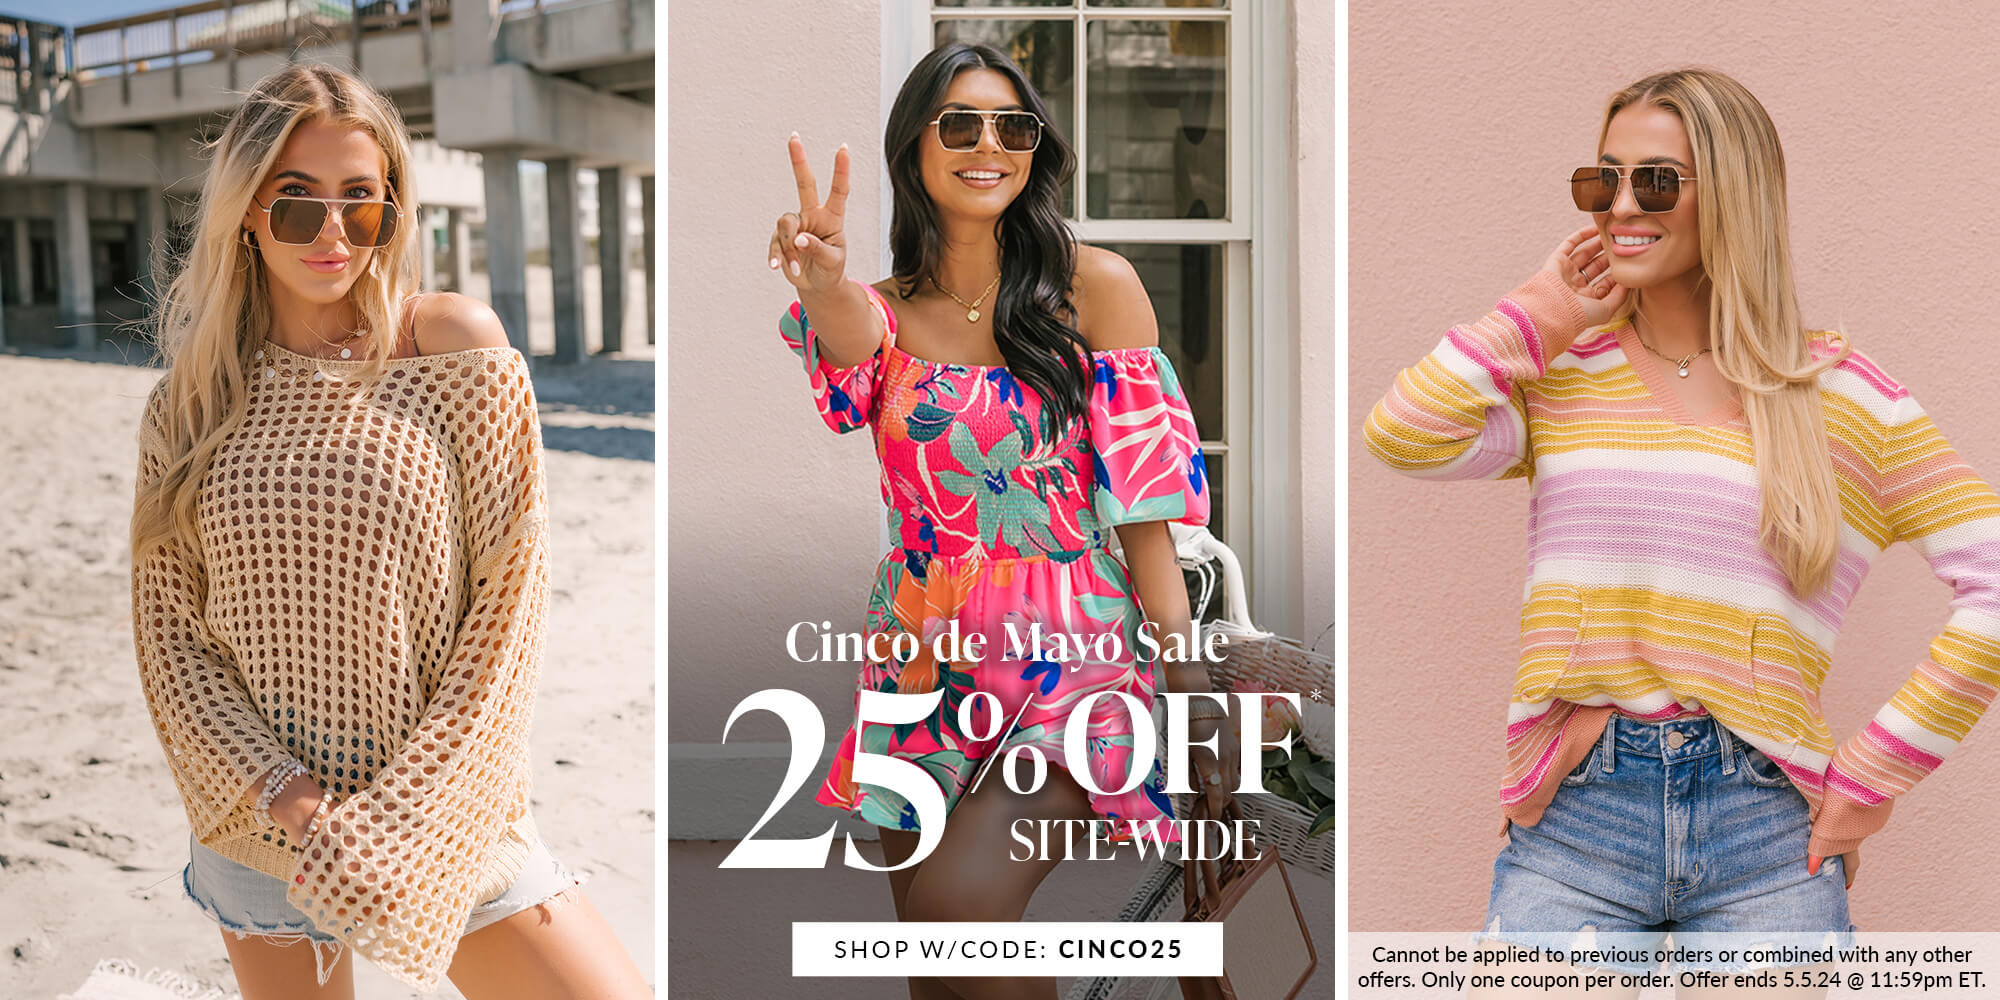 cinco de mayo sale 25% off sitewide shop with code CINCO25 Cannot be applied to previous orders or combined with any other offers. Only one coupon per order. Offer ends 5.5.24 @ 11:59pm ET.